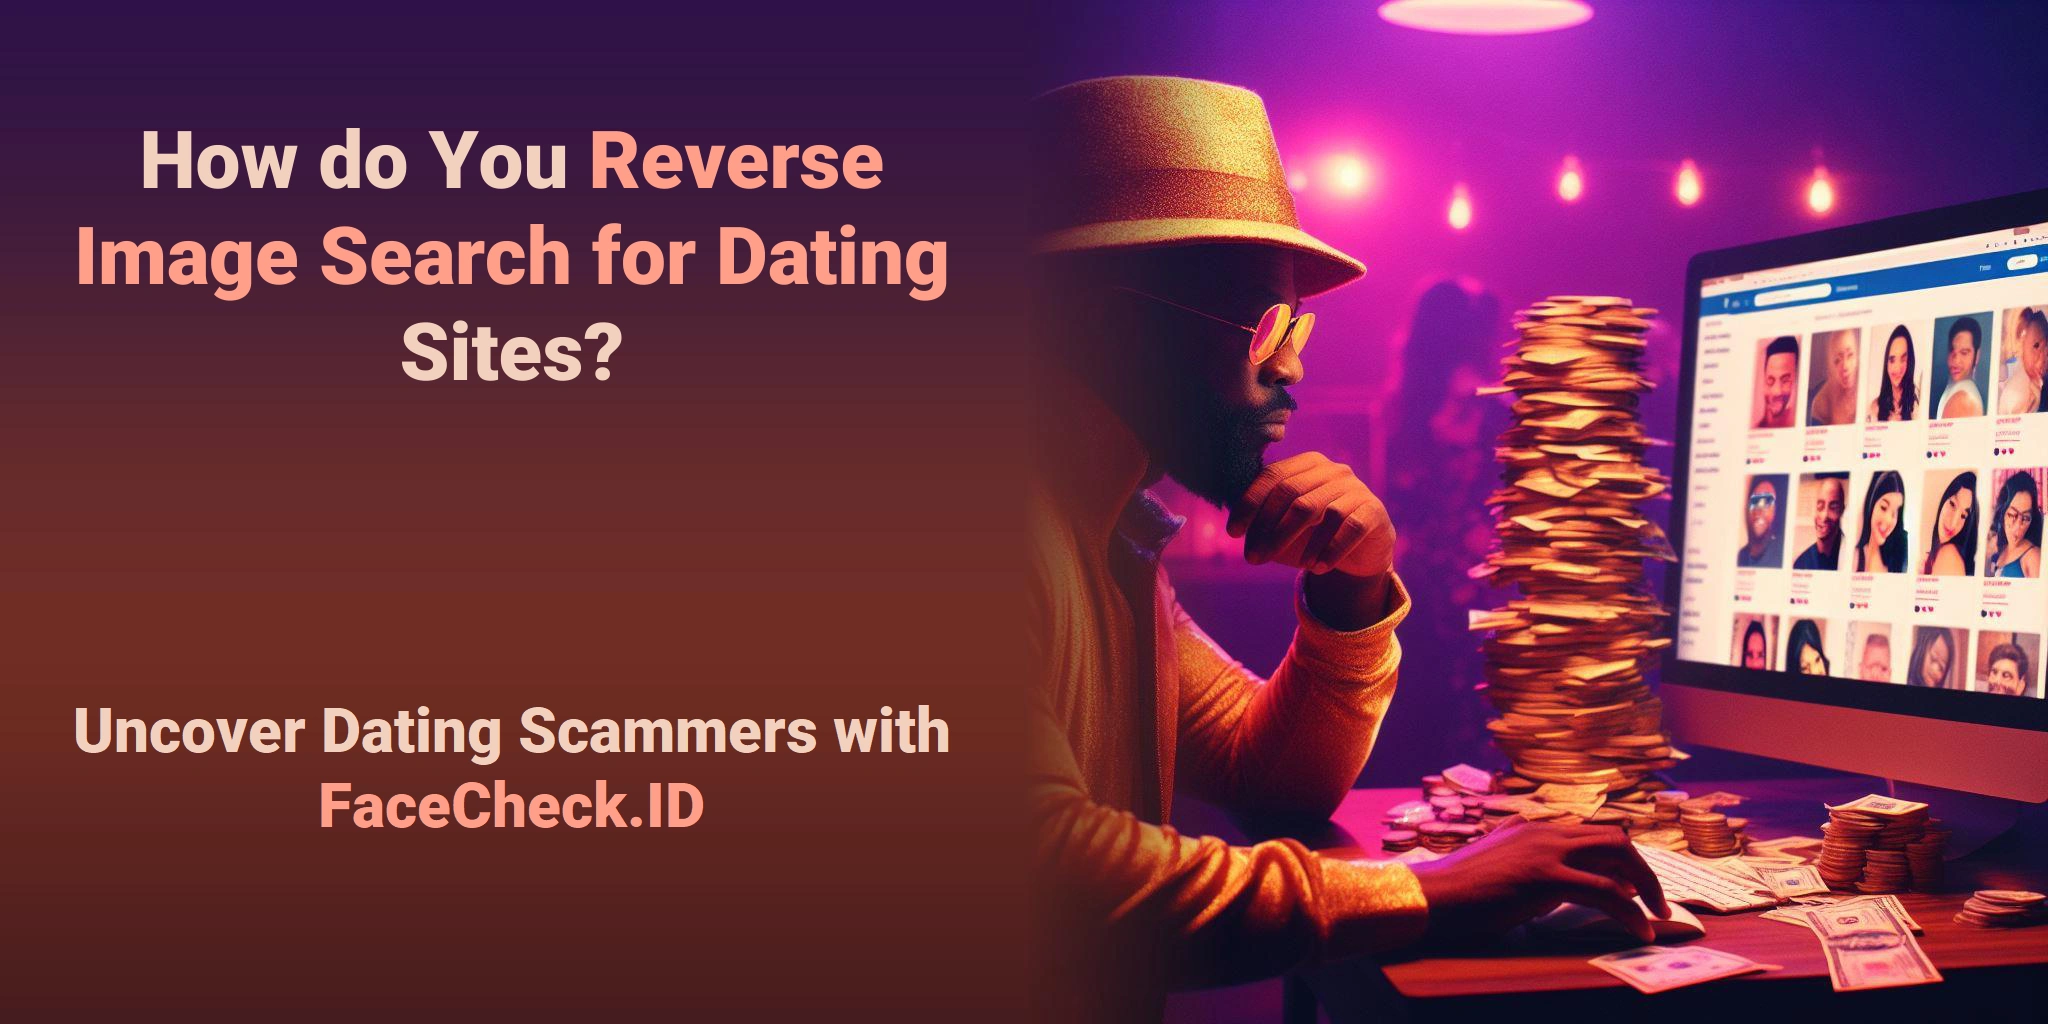 How do You Reverse Image Search for Dating Sites? Uncover Dating Scammers with FaceCheck.ID